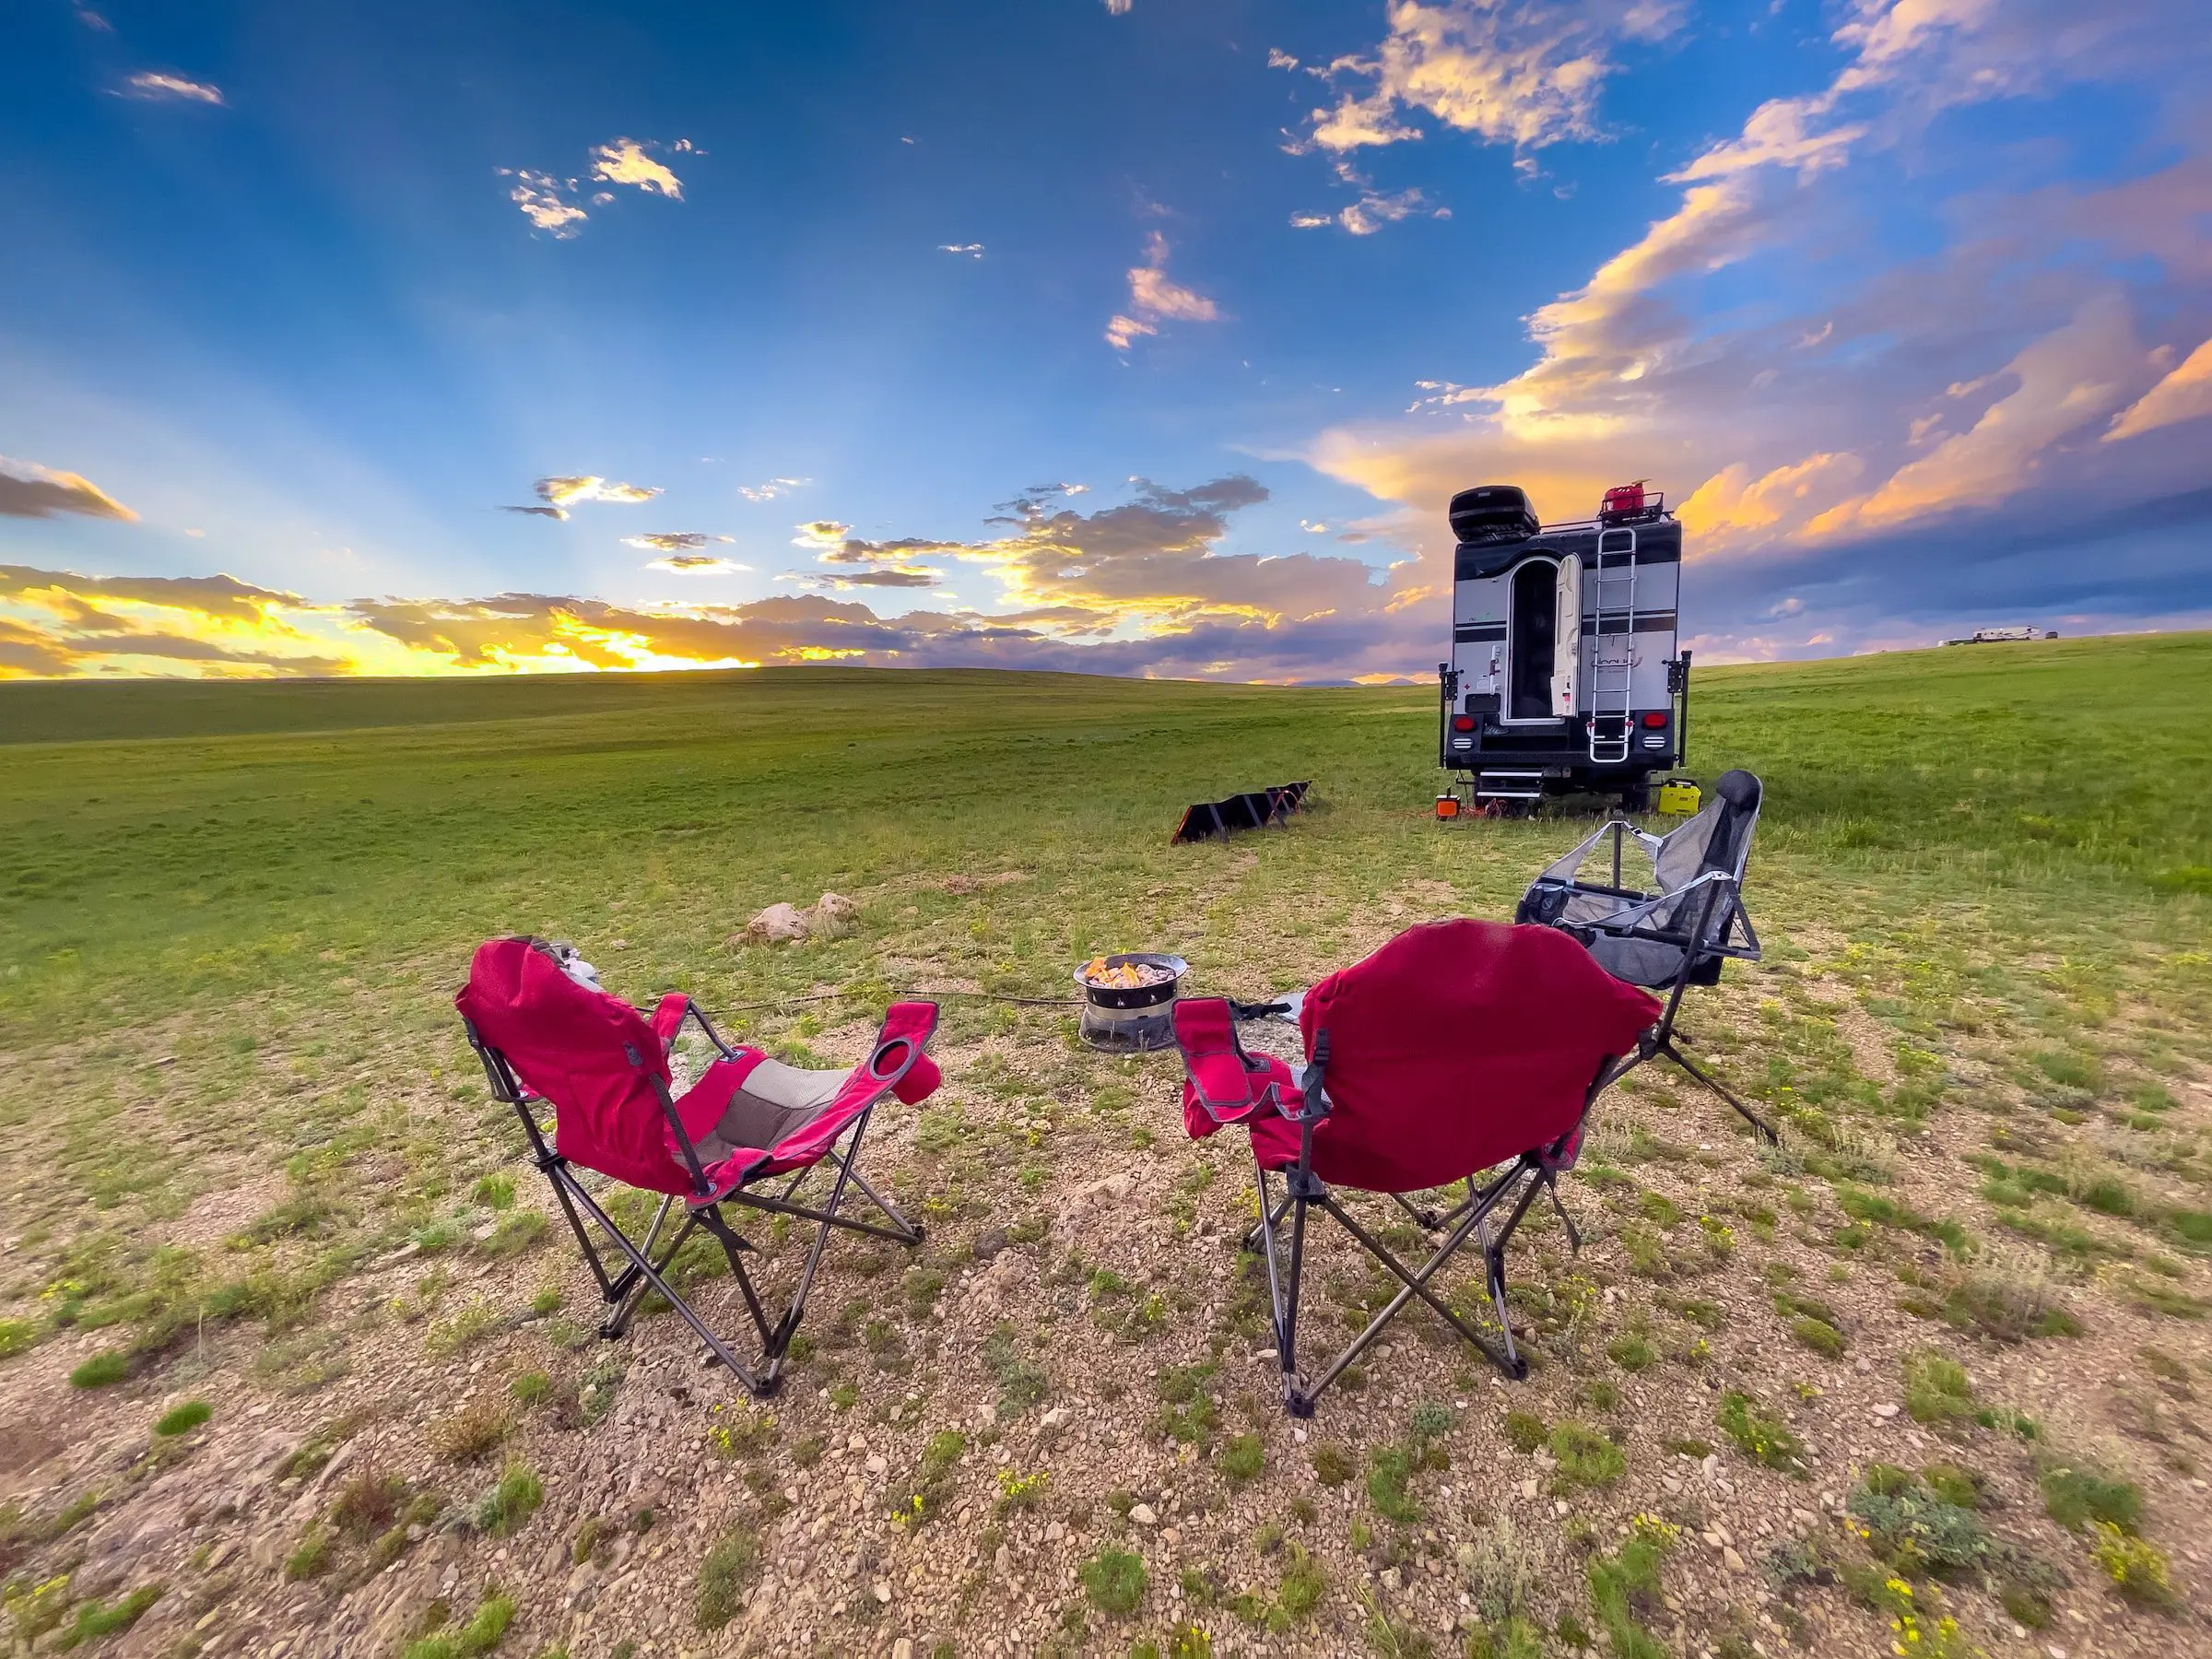 How to Find Land Zoned for Recreational Vehicle Living